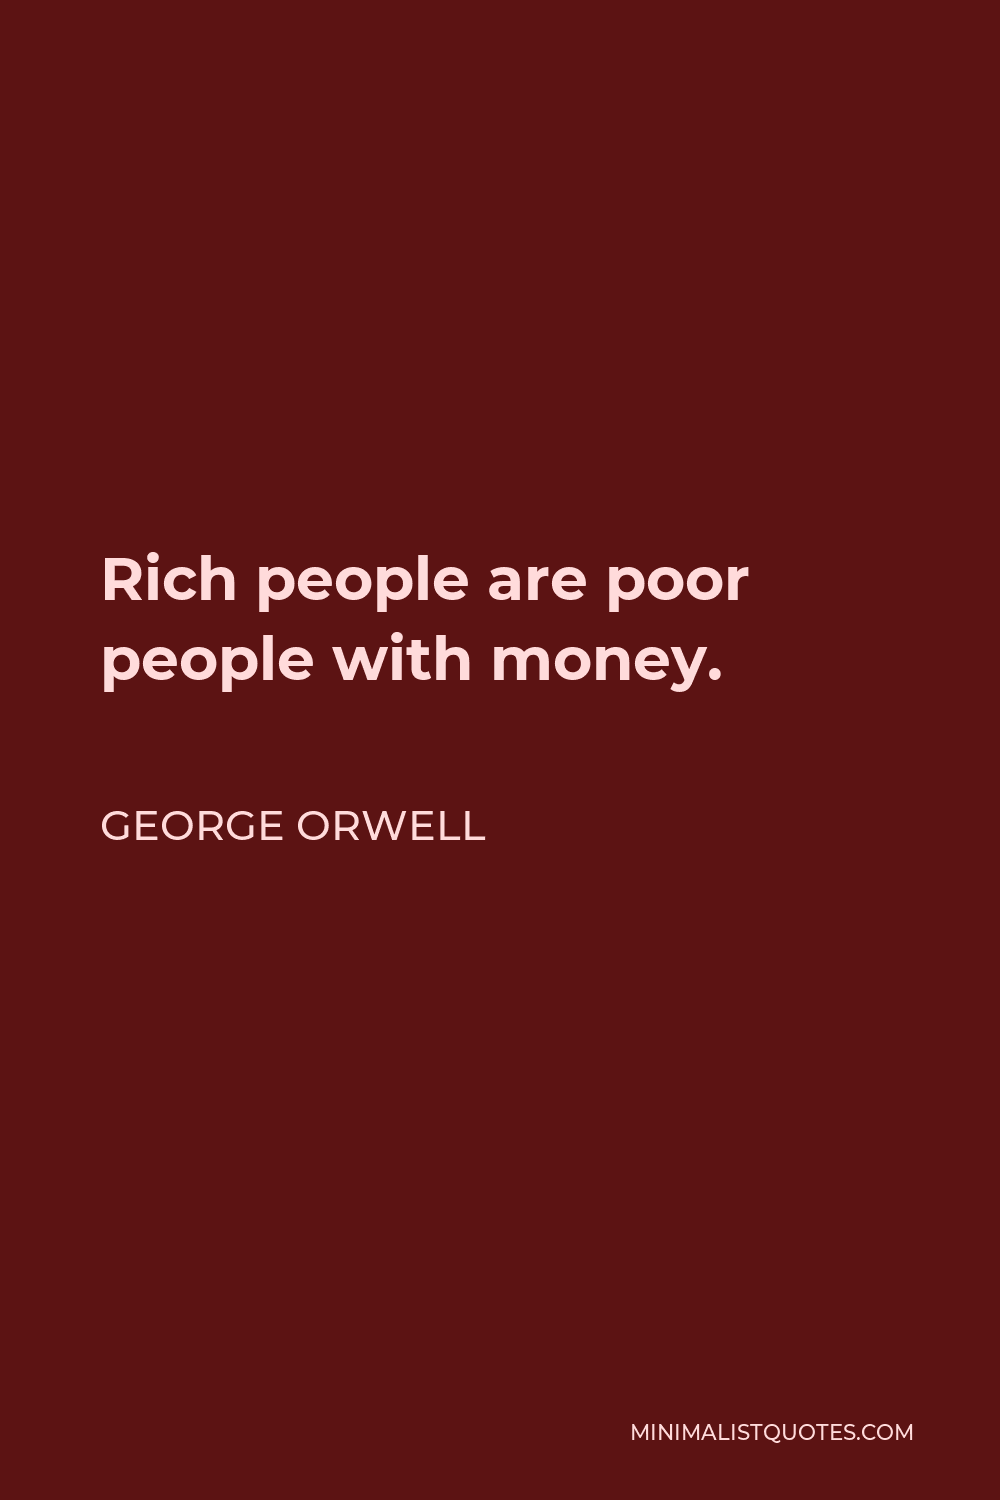 George Orwell Quote - Rich people are poor people with money.